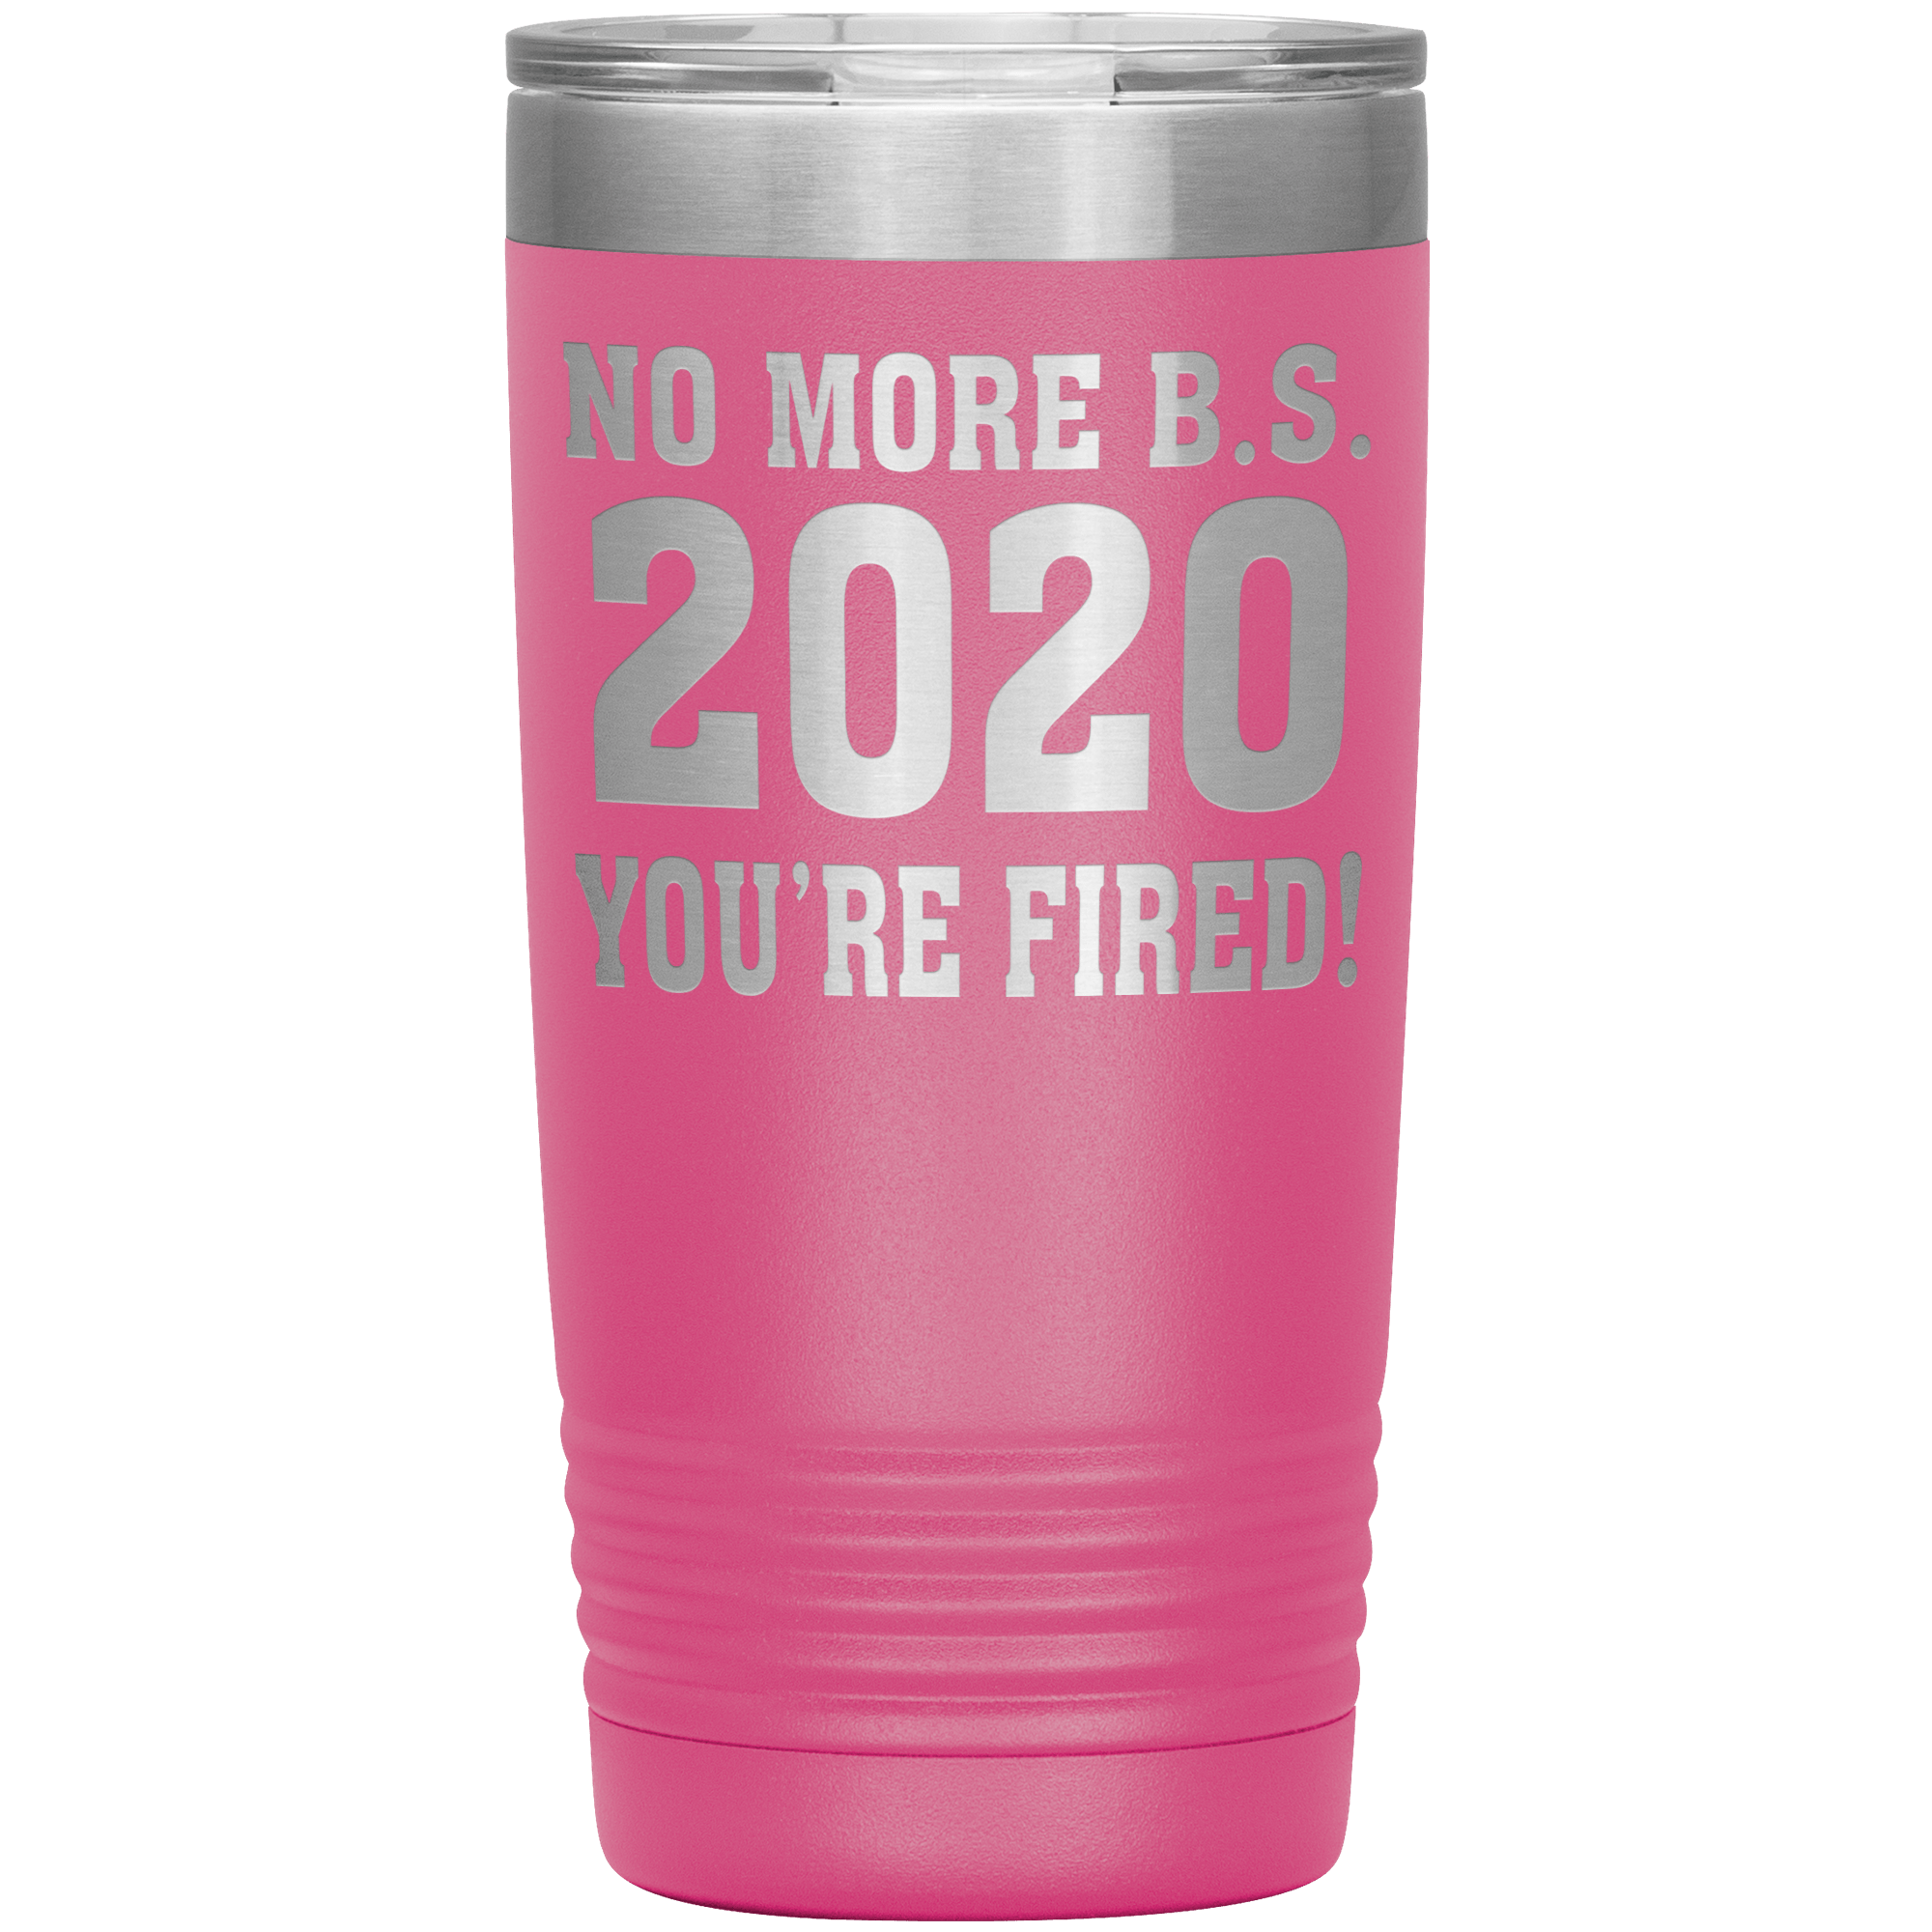 " NO MORE B. S. 2020 YOU'RE FIRED! " TUMBLER